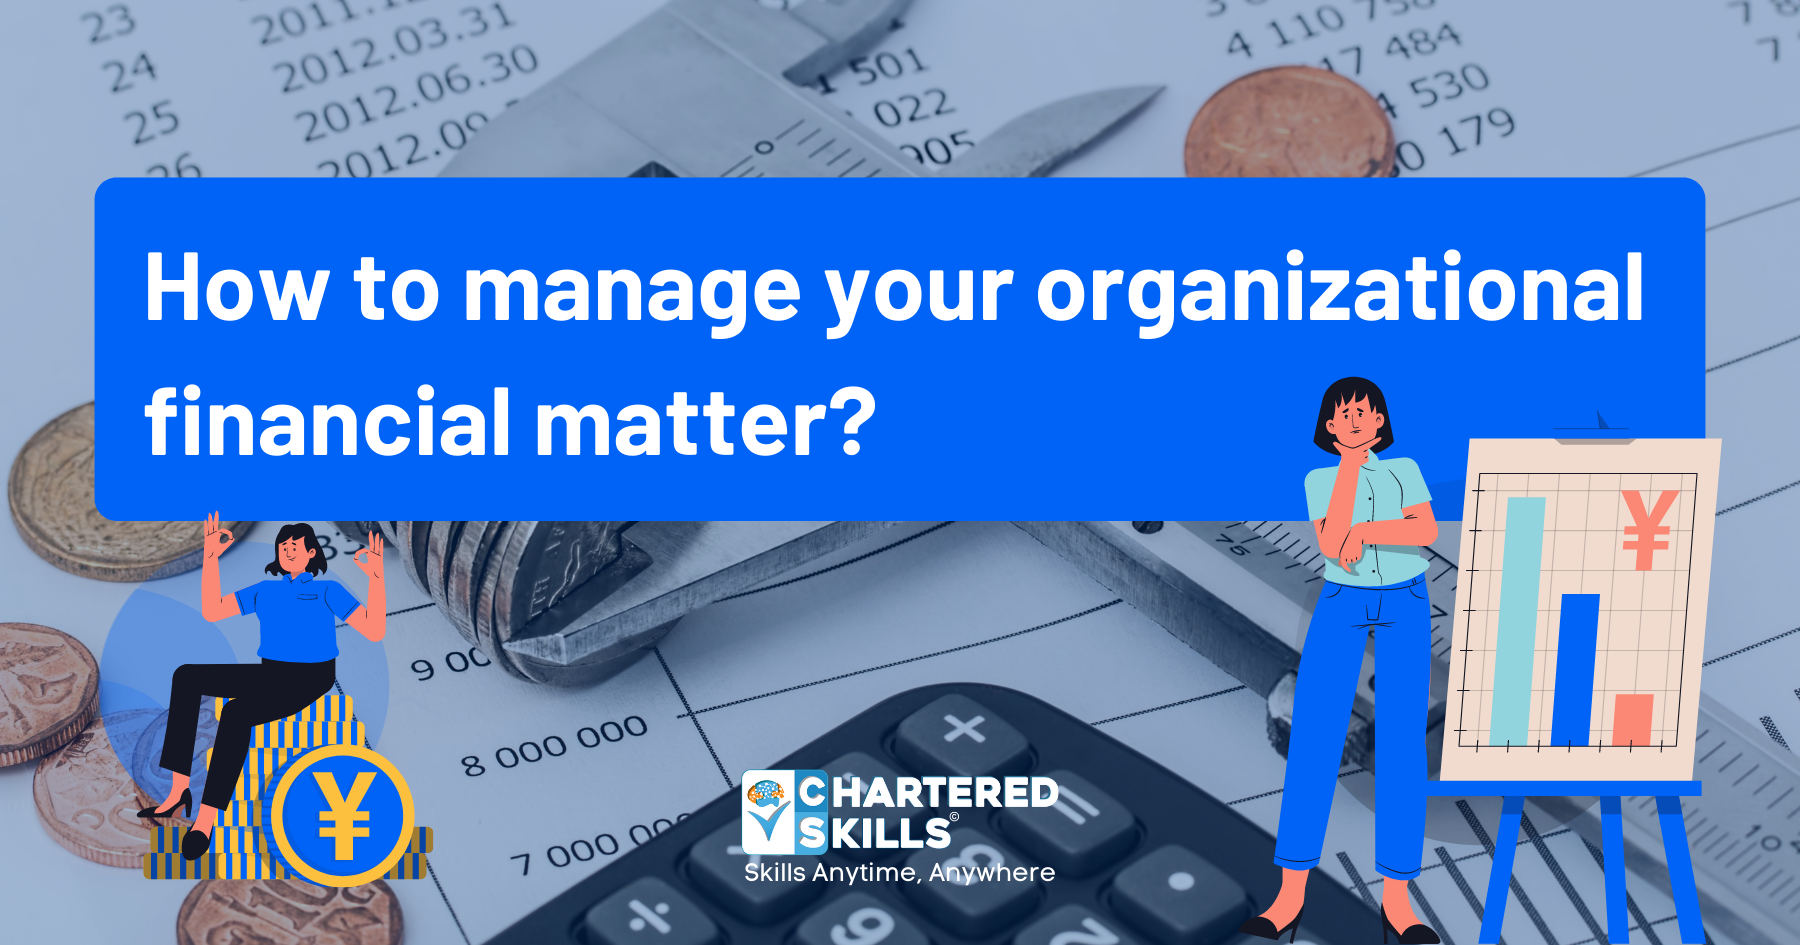 How to manage your organizational financial matter